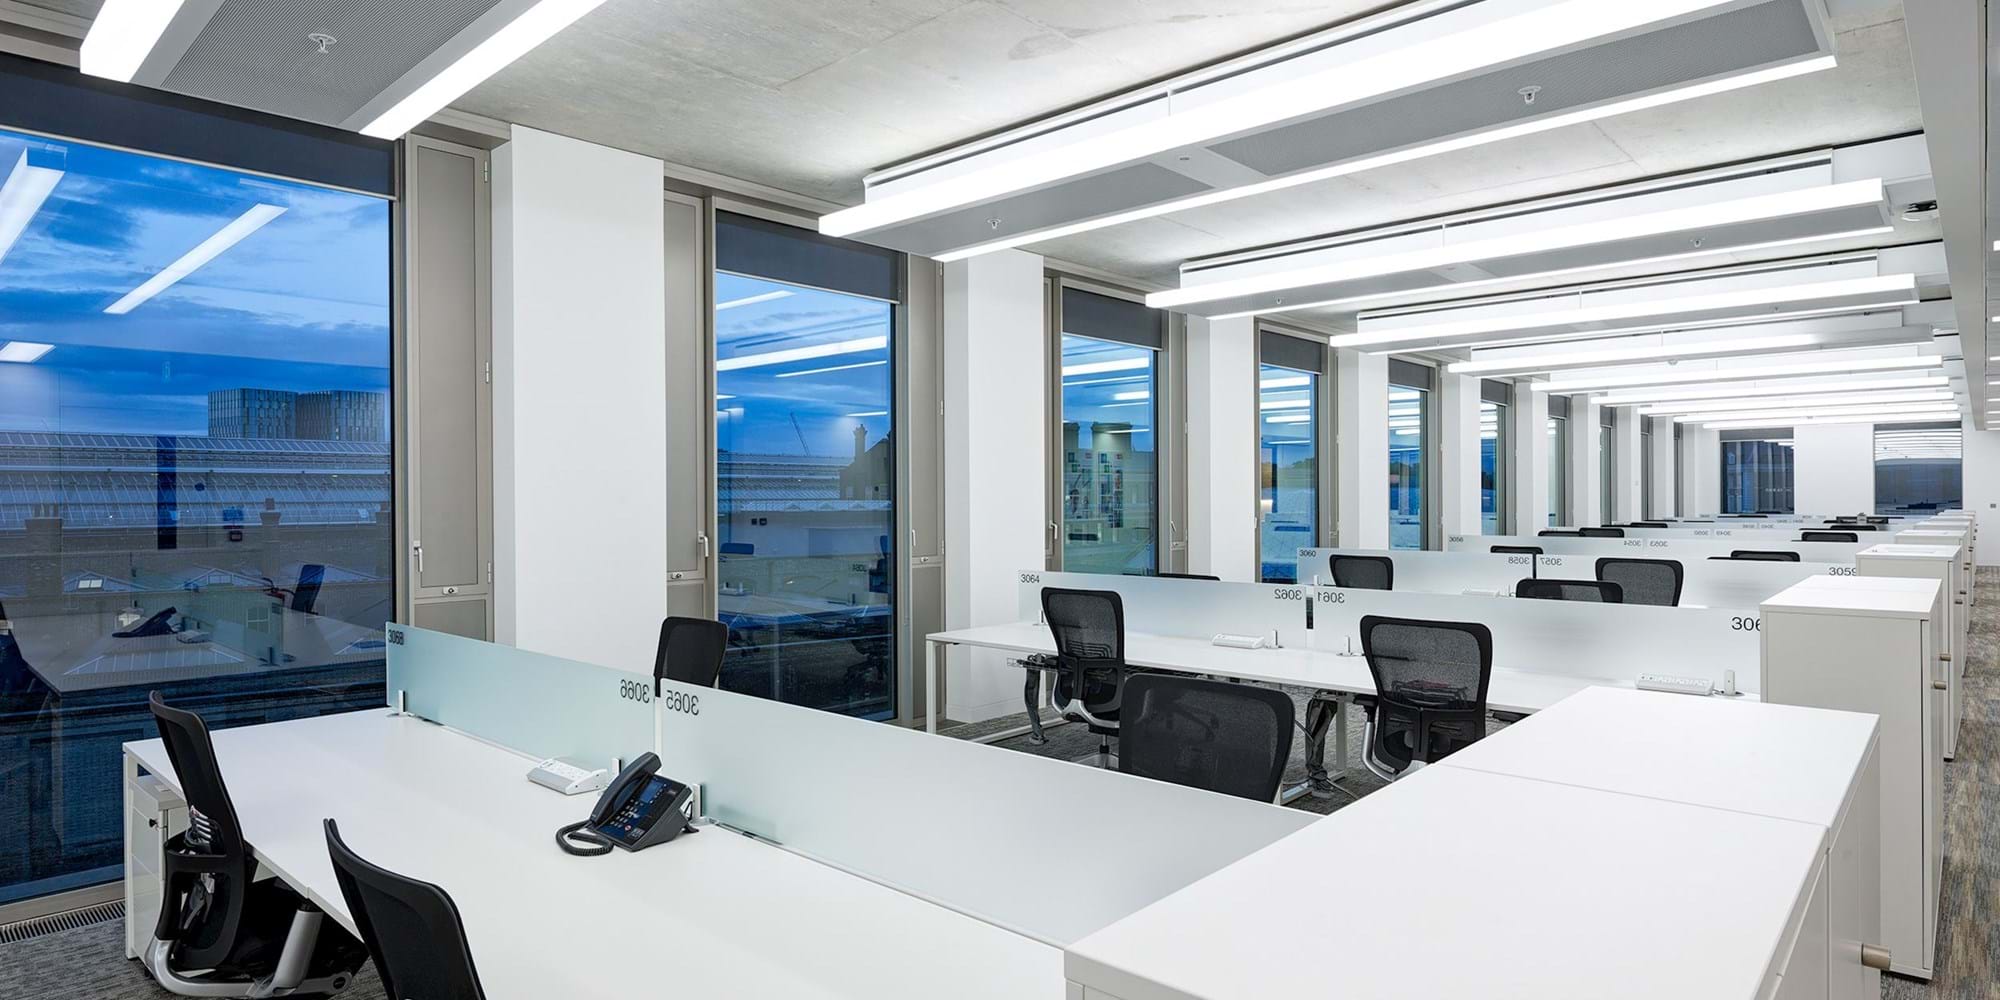 Modus Workspace office design, fit out and refurbishment - IT Company - Open Plan Office - CSG London 04 highres sRGB.jpg